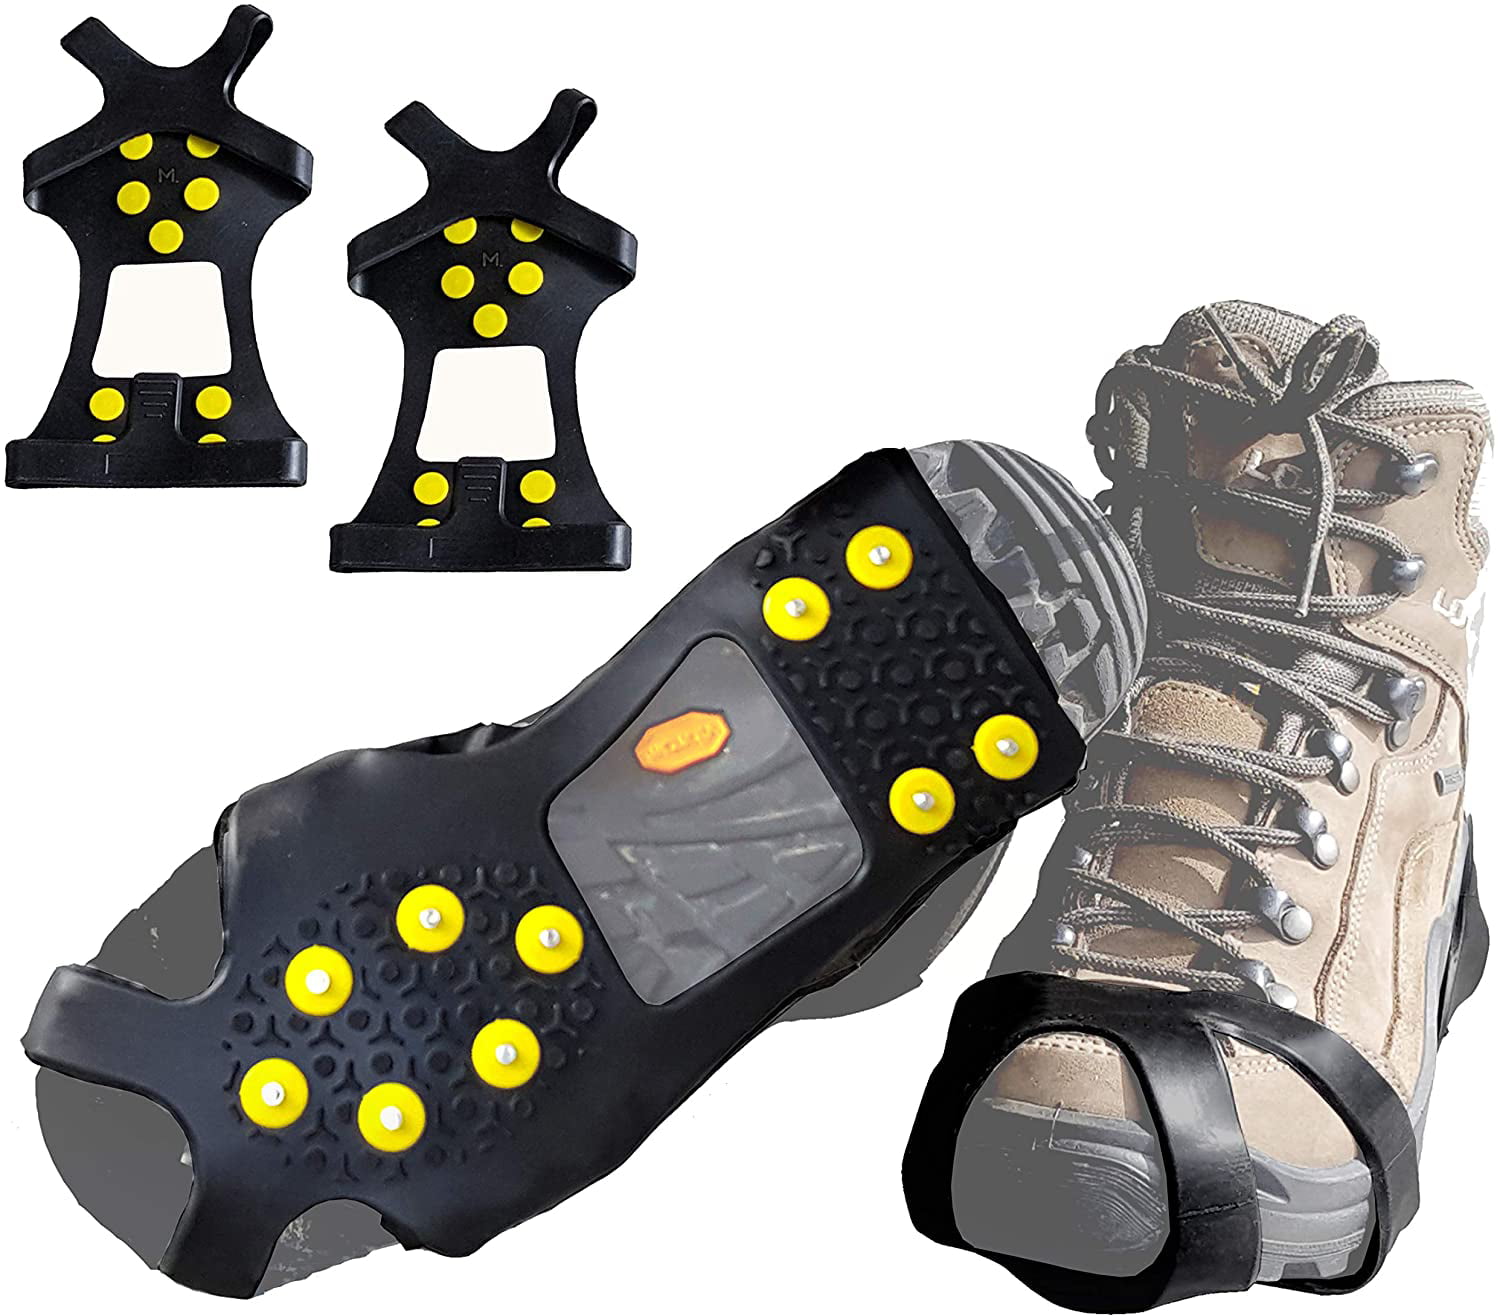 Ice Snow Crampons Cleats Anti-slip Shoes Spike Grips Boots Traction Grippers 